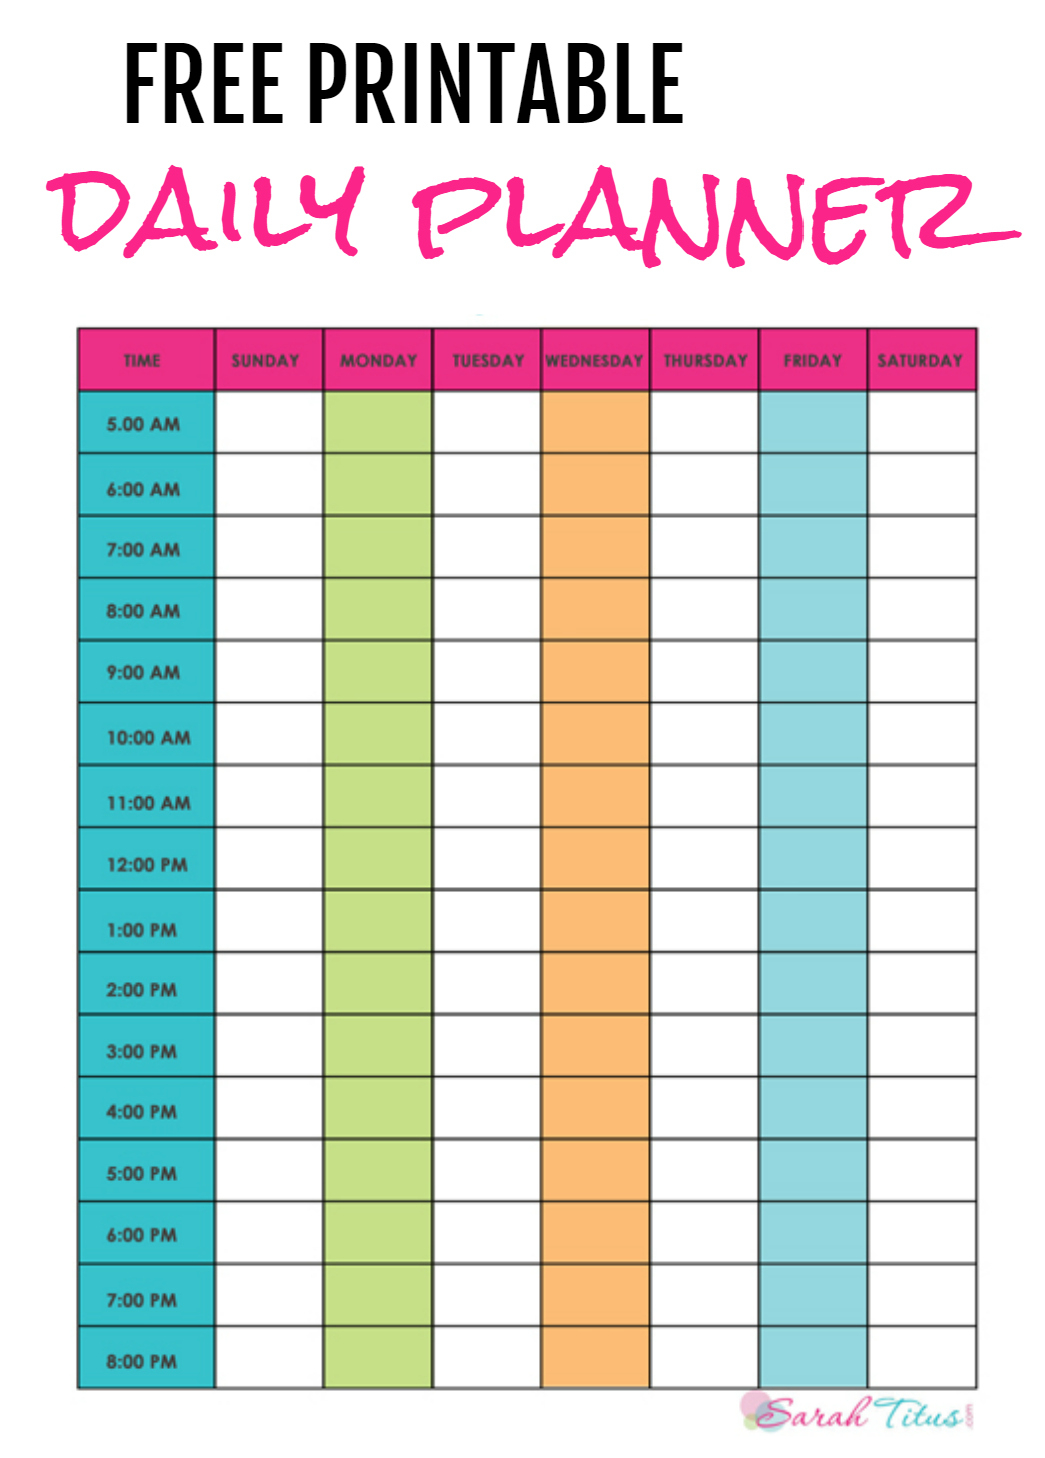 Printable Weekly Planner With Time Slots Calendar Inspiration Design